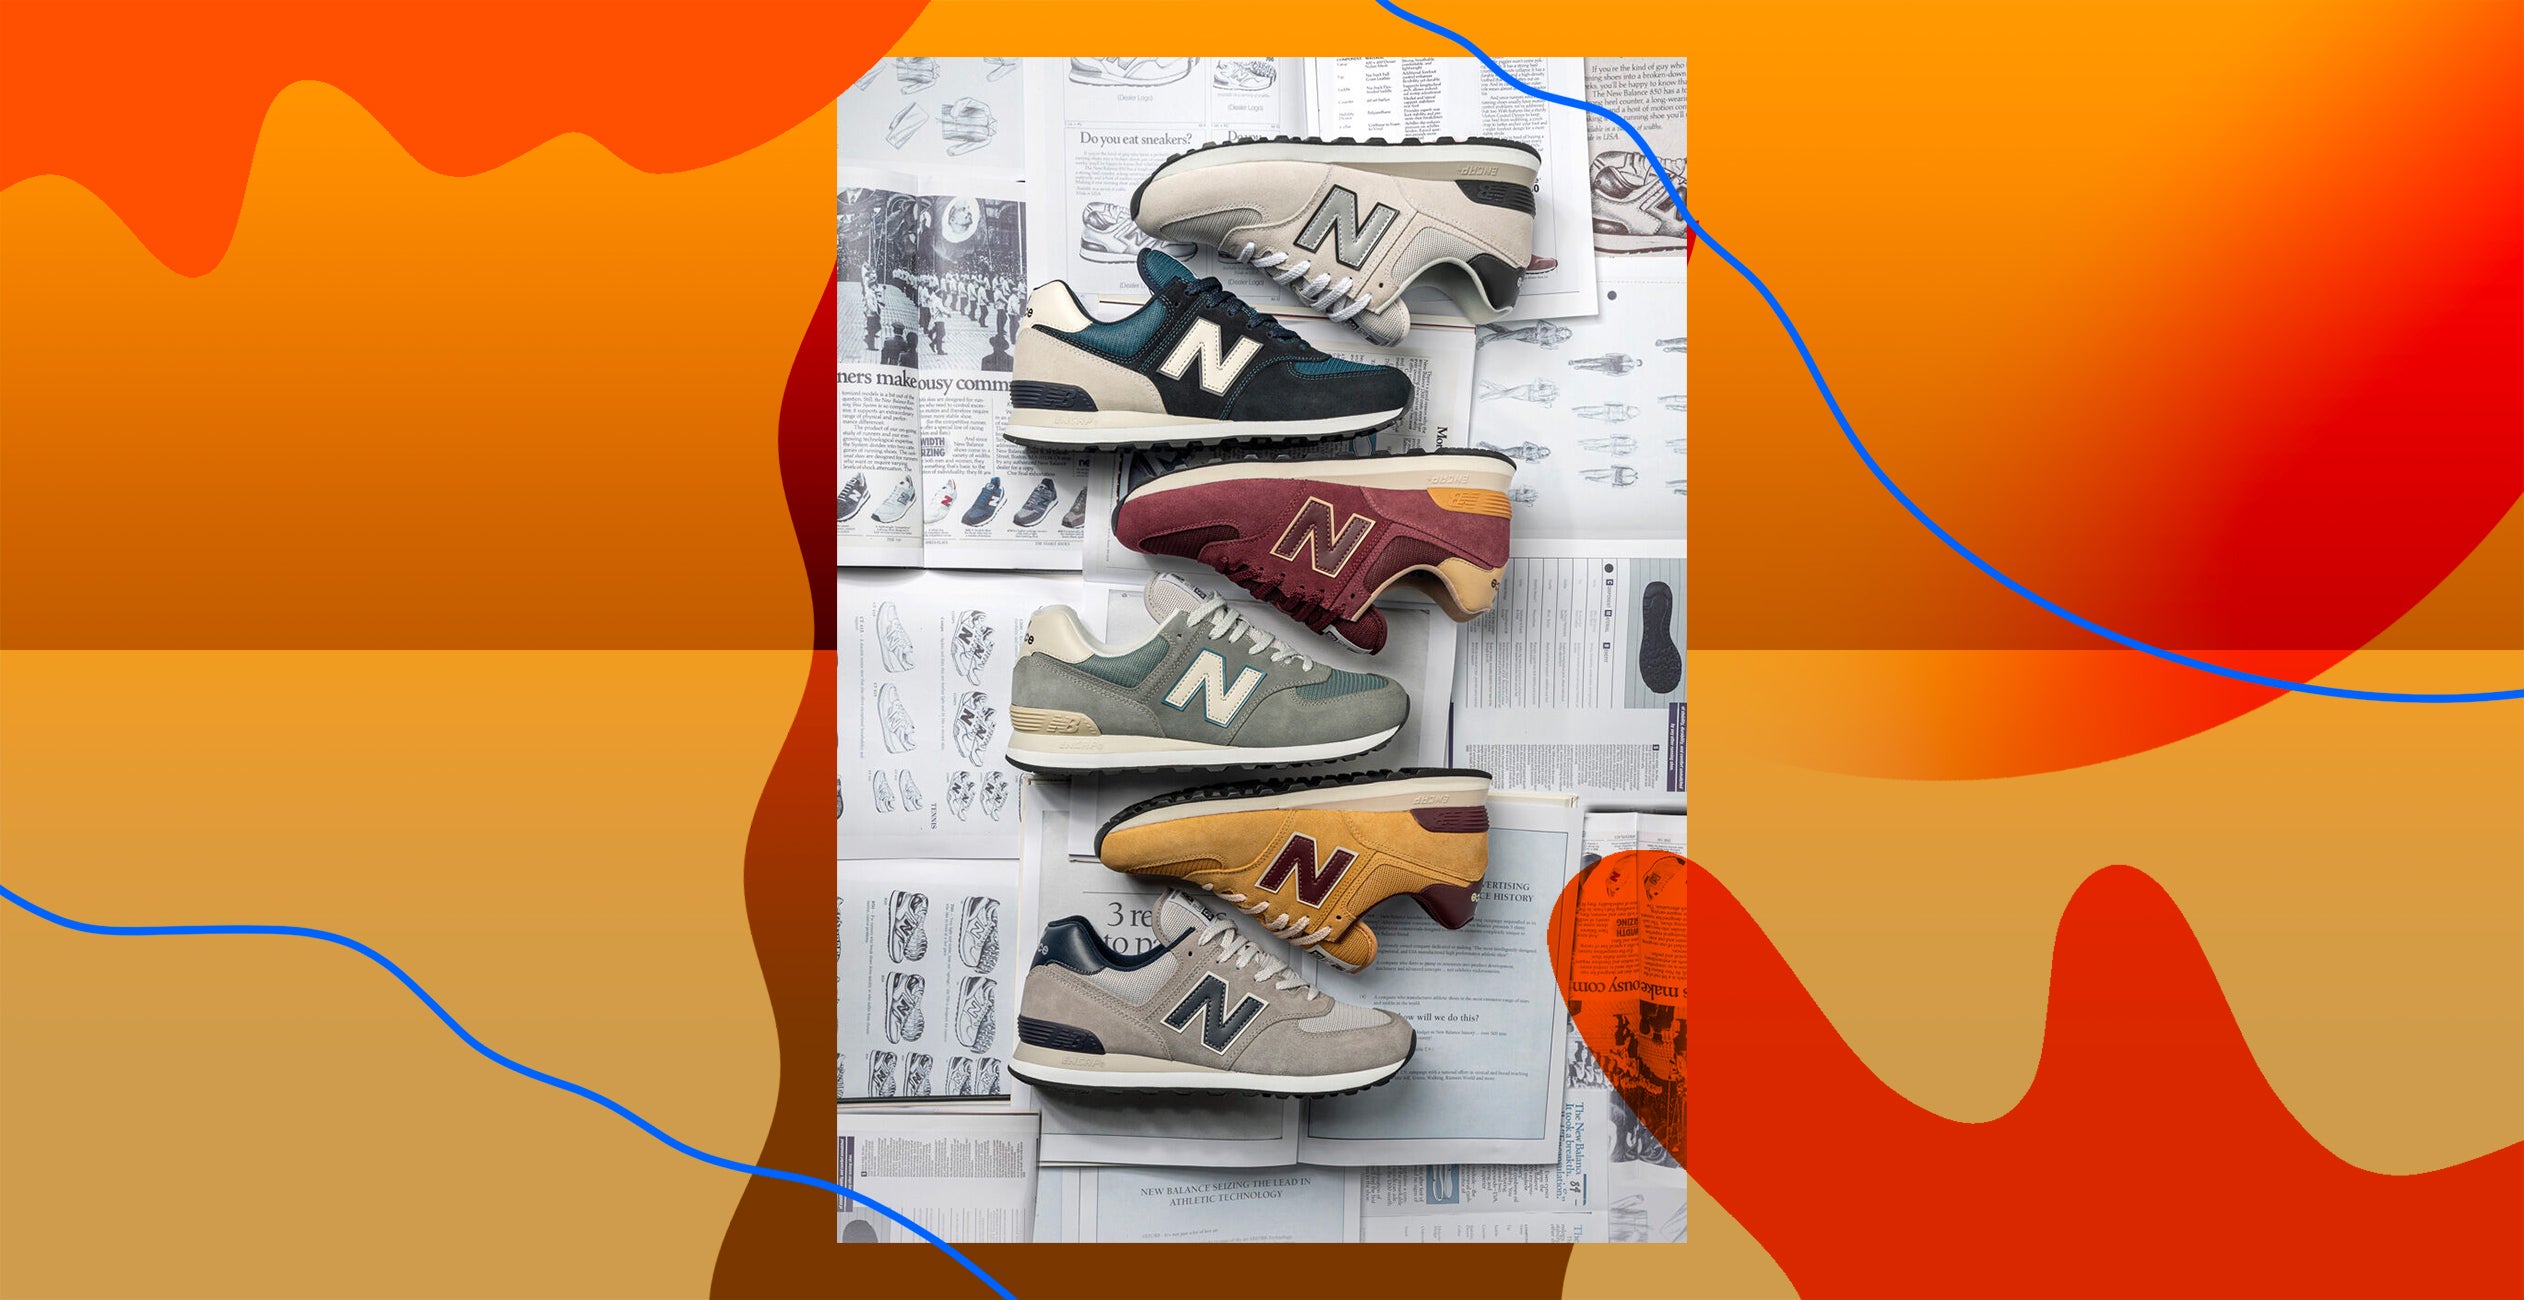 The Best New Balance Sneakers According To User Reviews خلفيات نوم